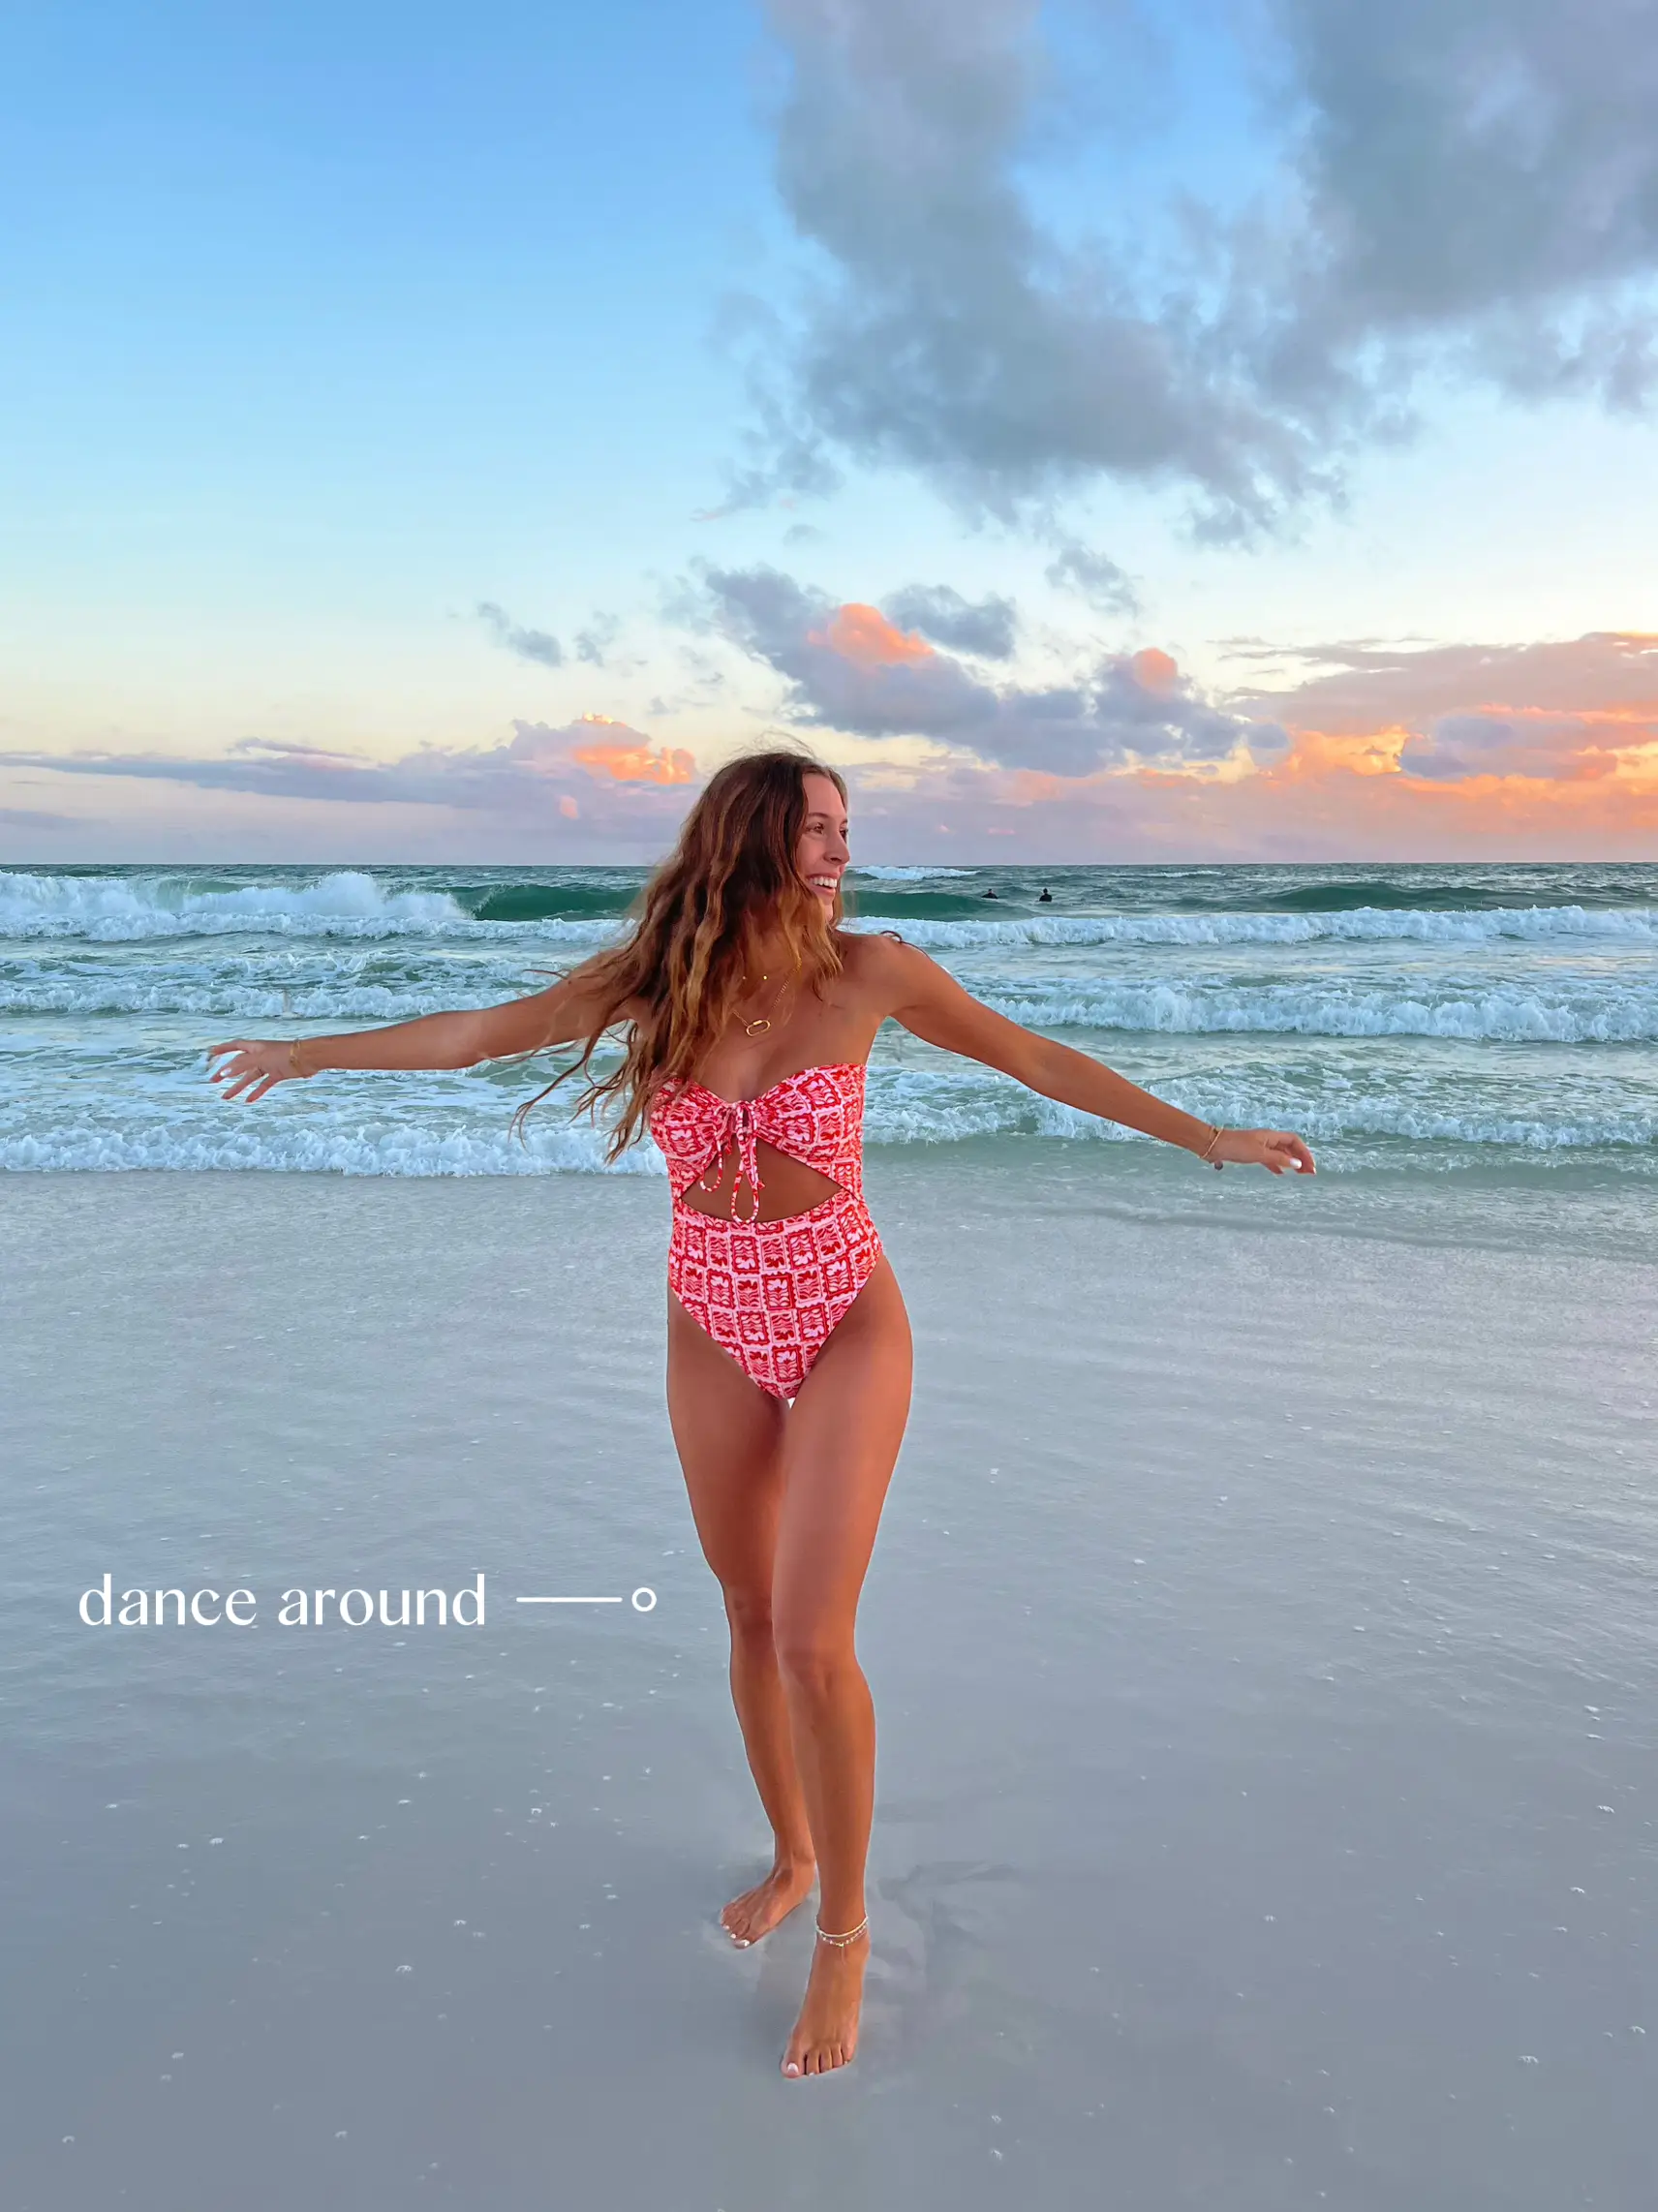  A woman in a pink bikini is standing on a beach.